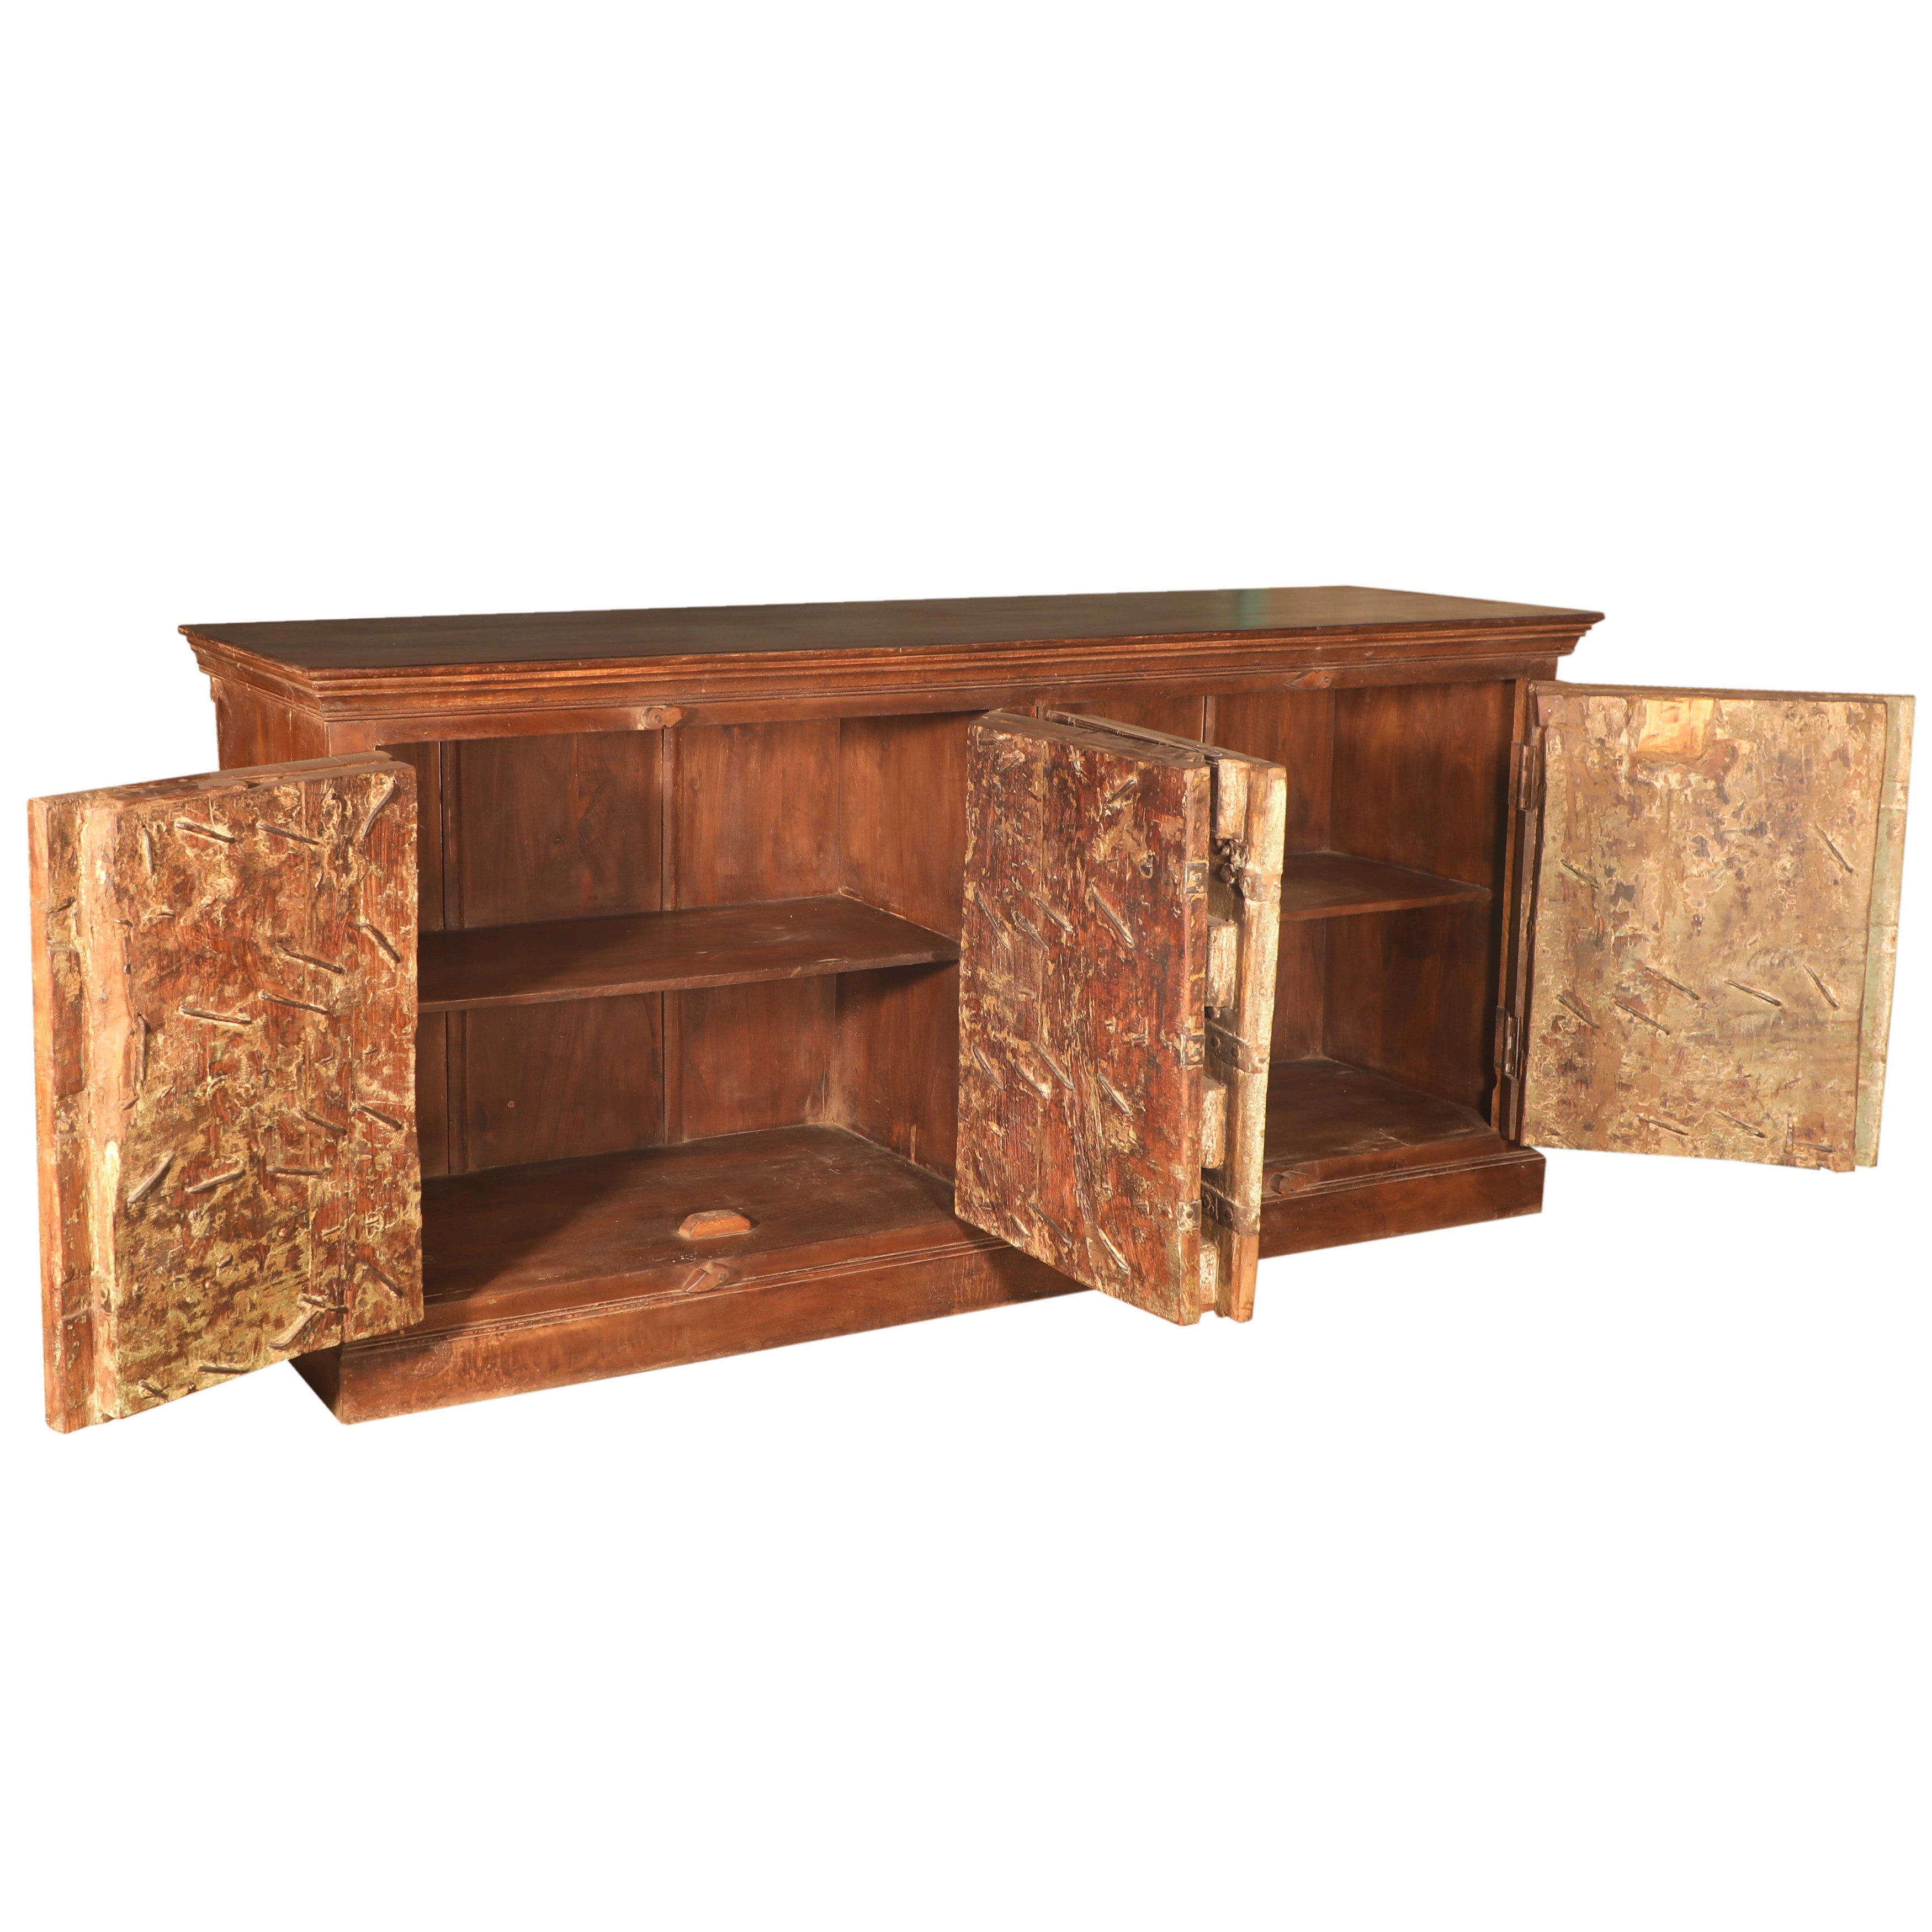 Antique Wood Sideboard - What A Room